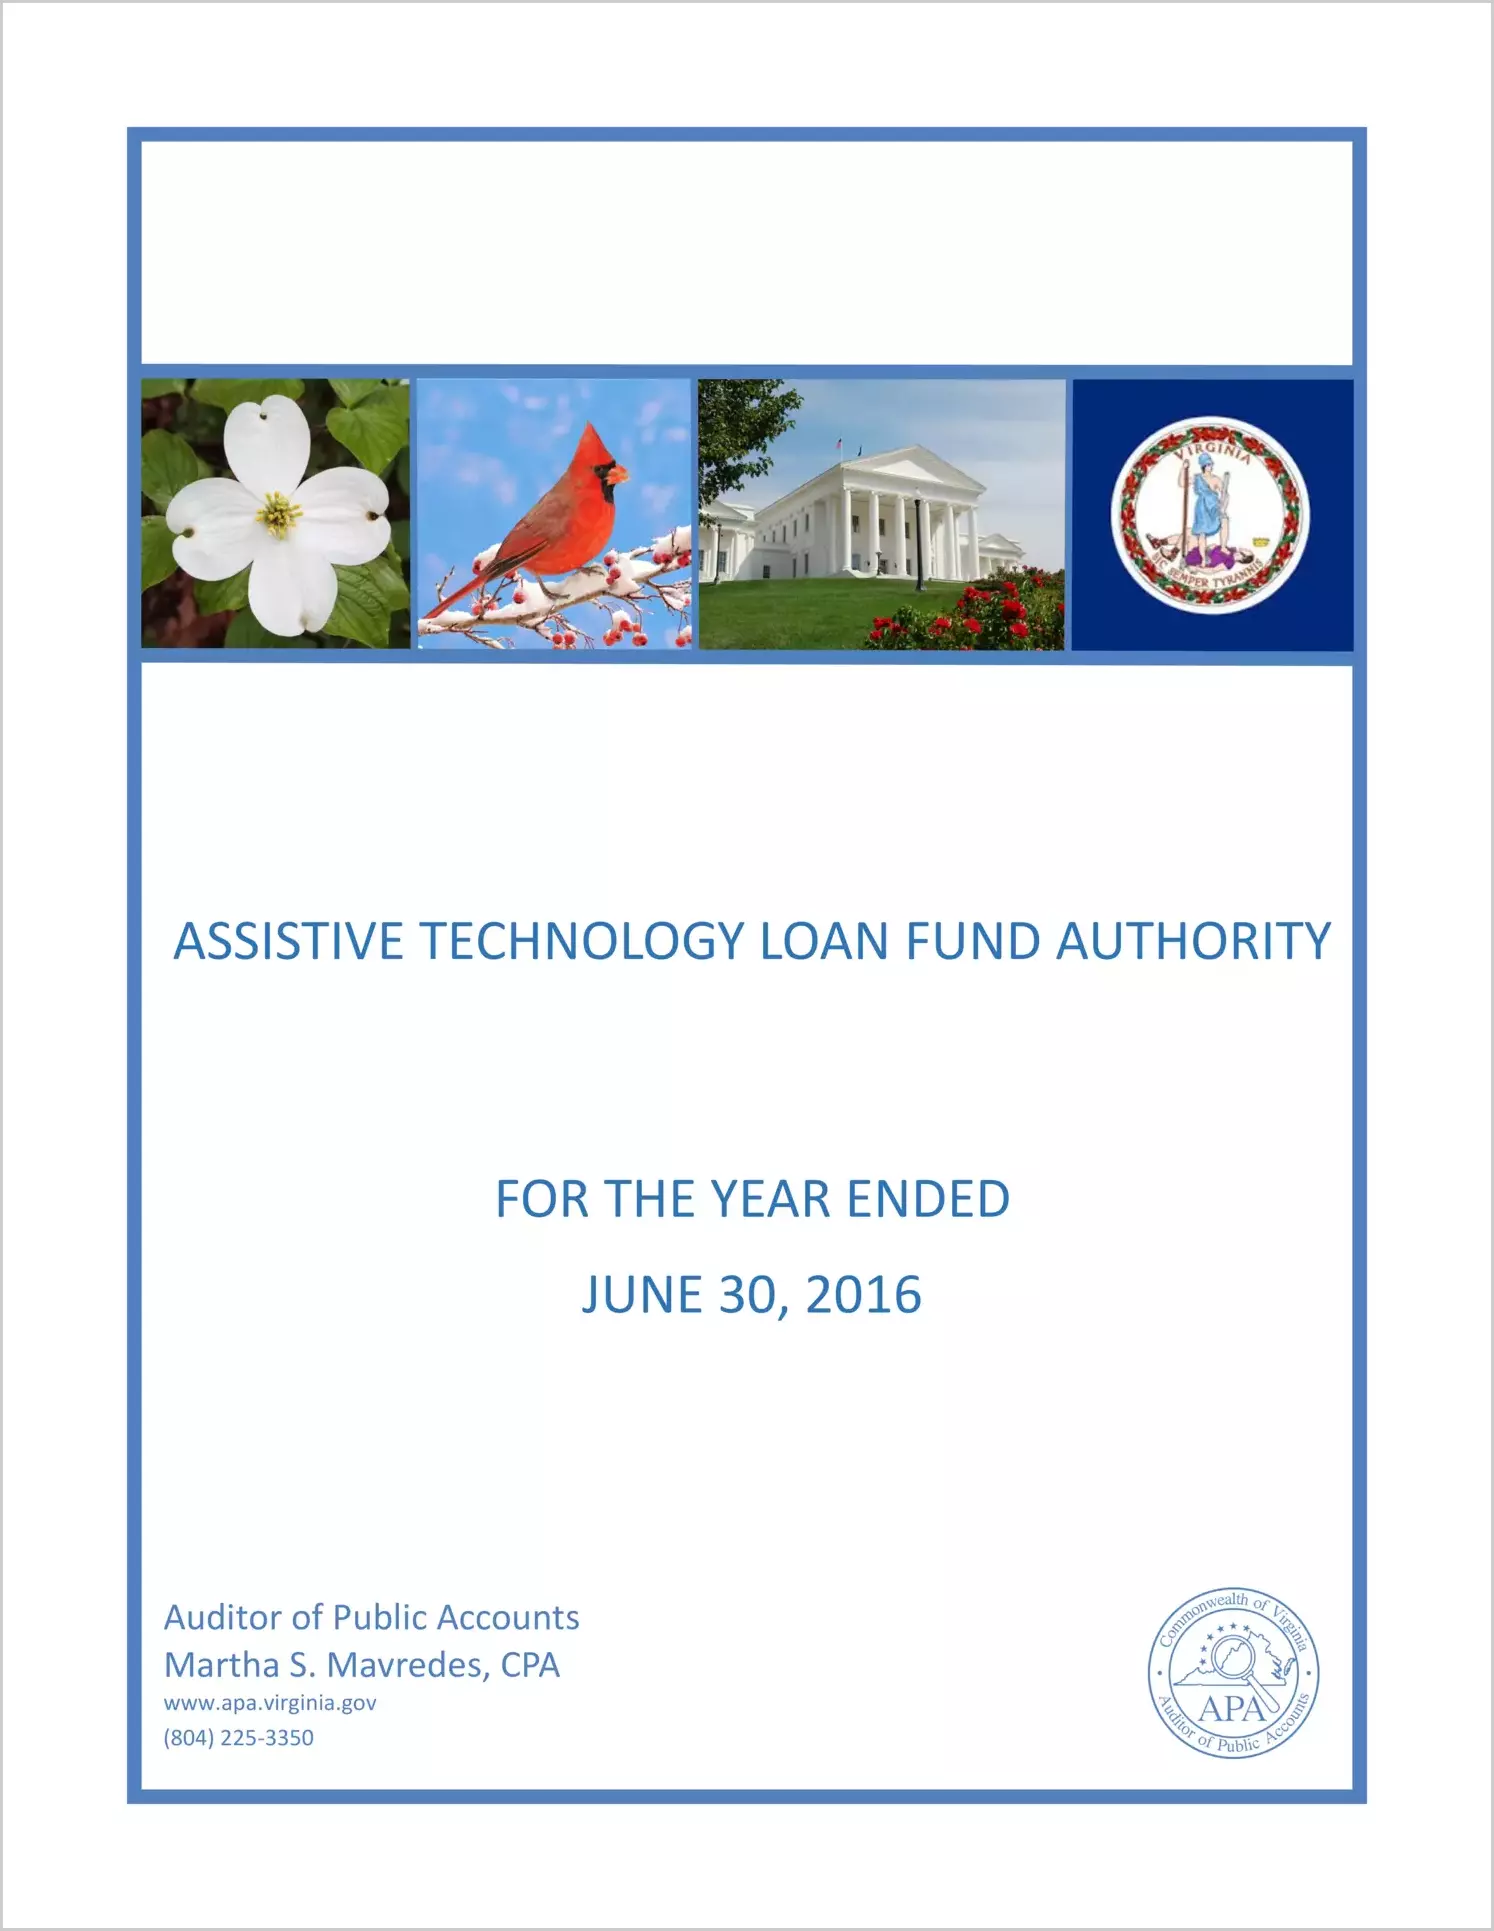 Assistive Technology Loan Fund Authority for the year ended June 30, 2016